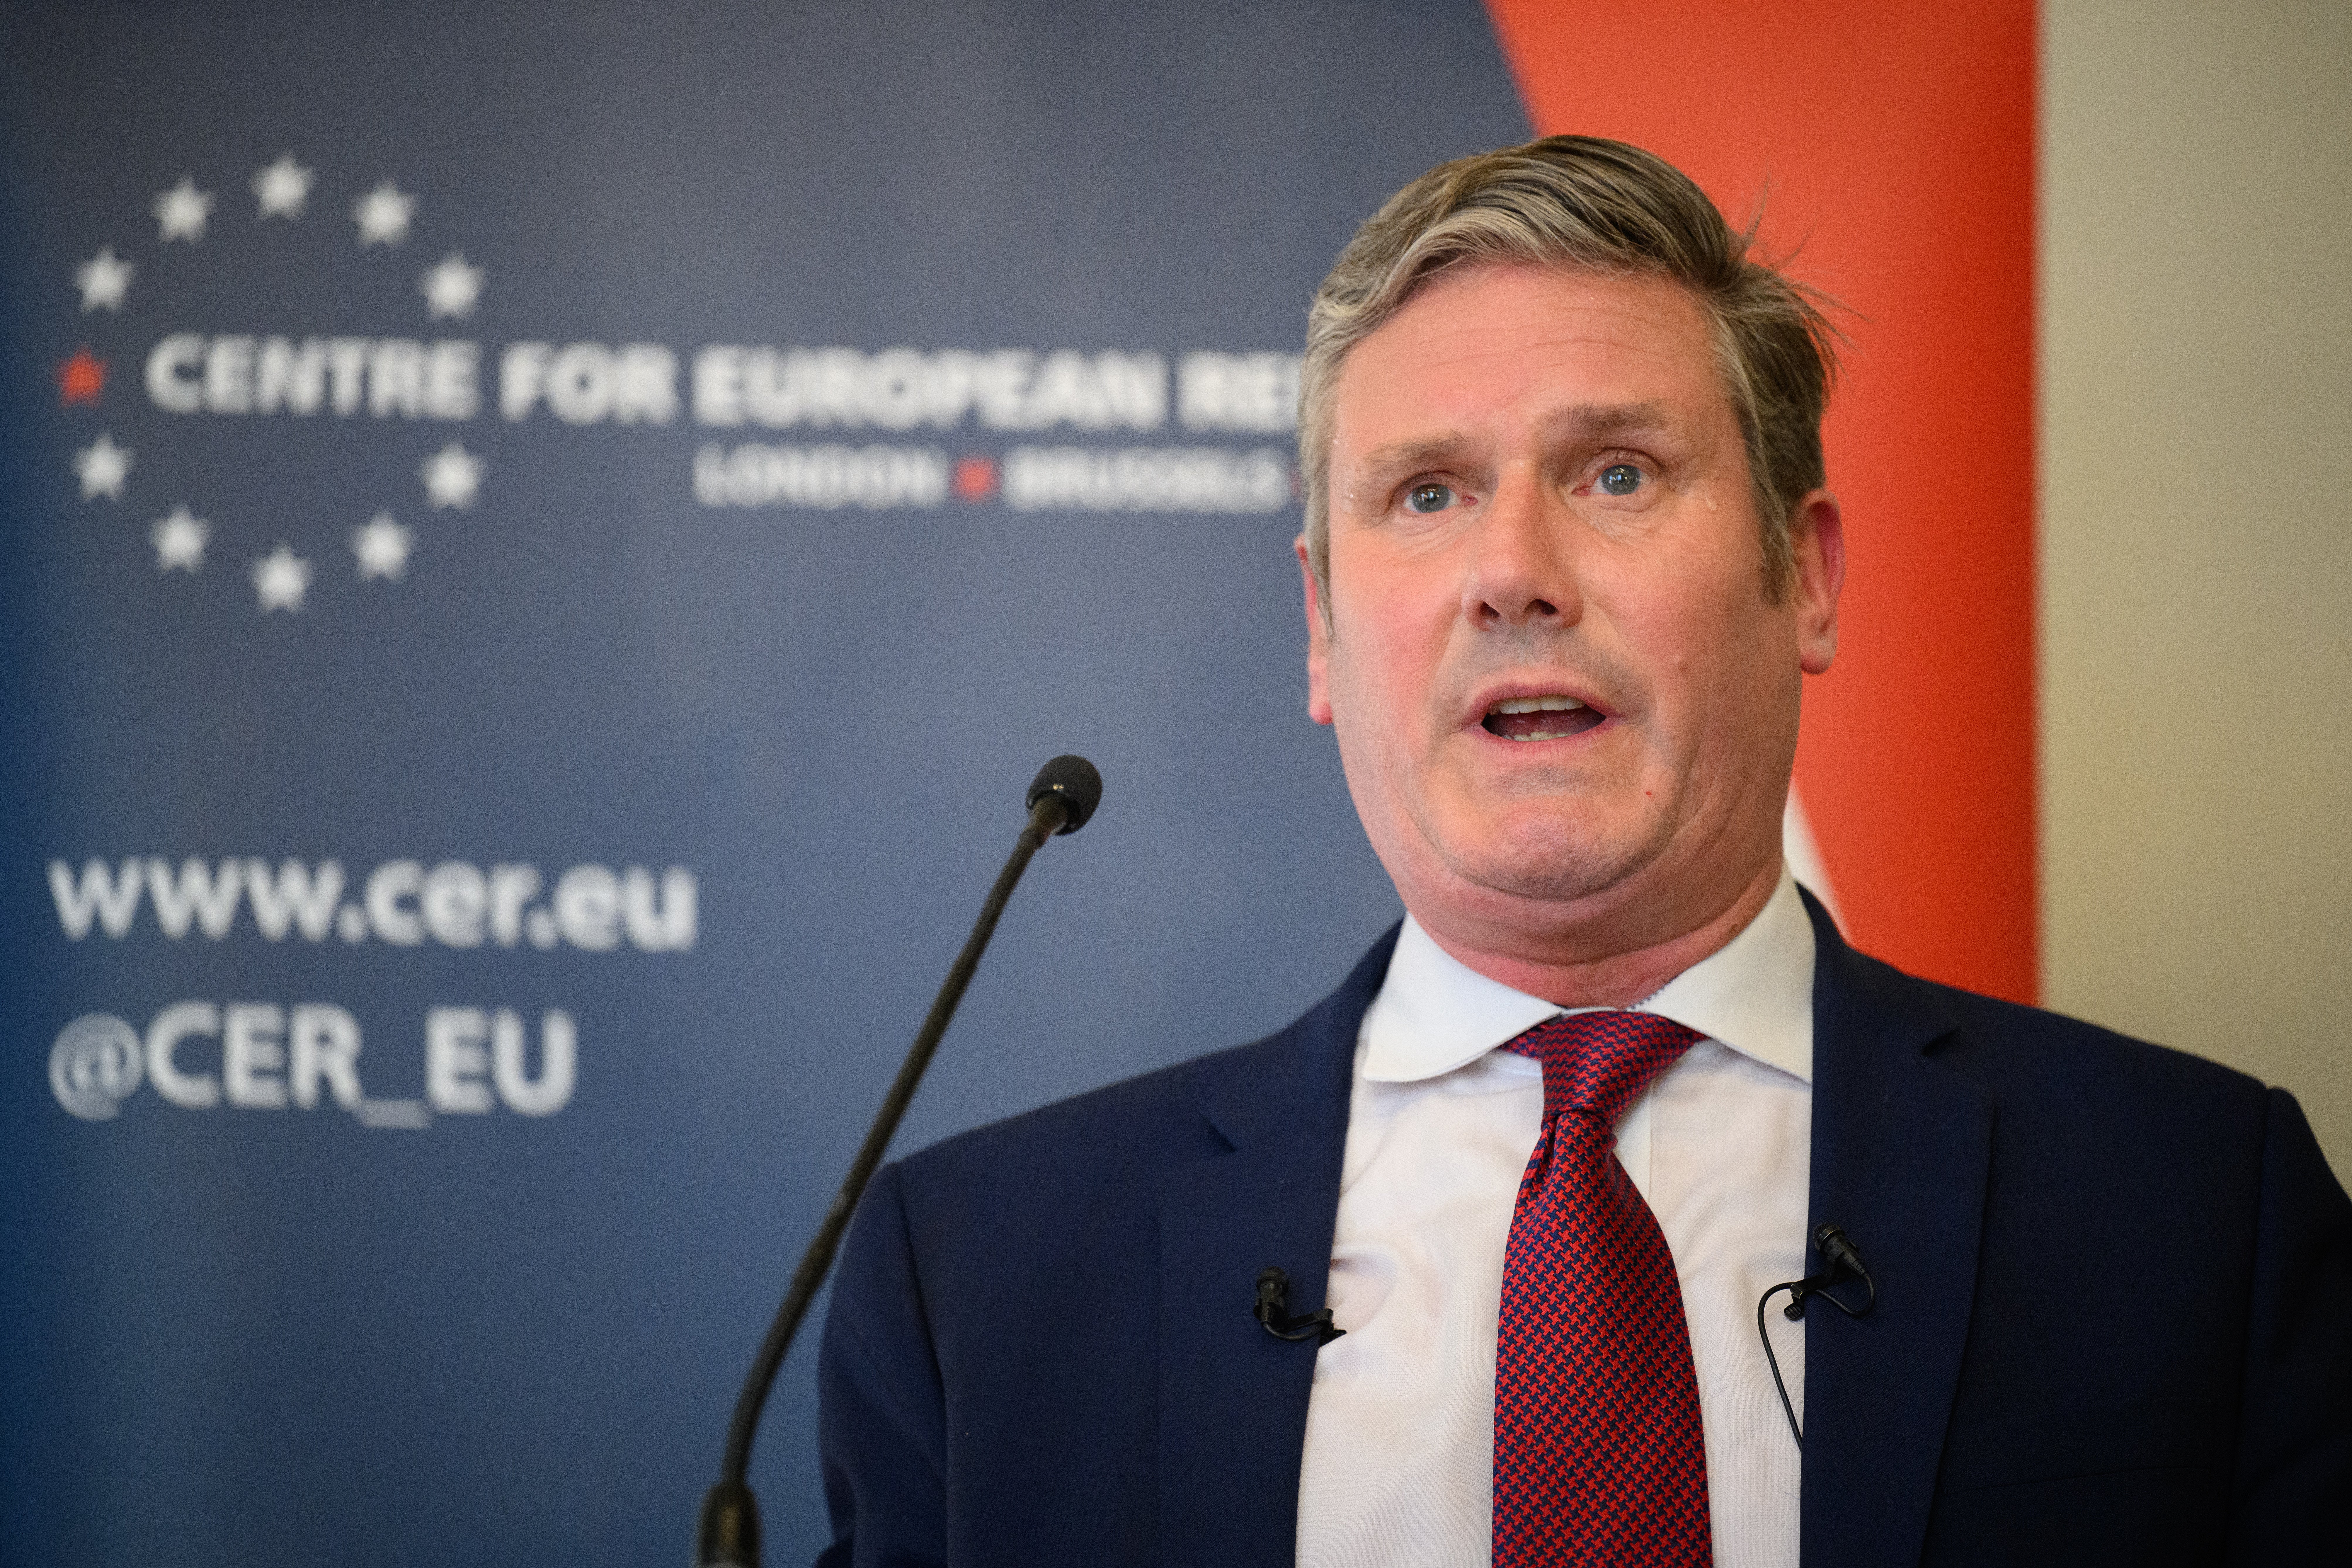 Ambassadors from several European countries including Germany and Italy listened in puzzlement to Starmer